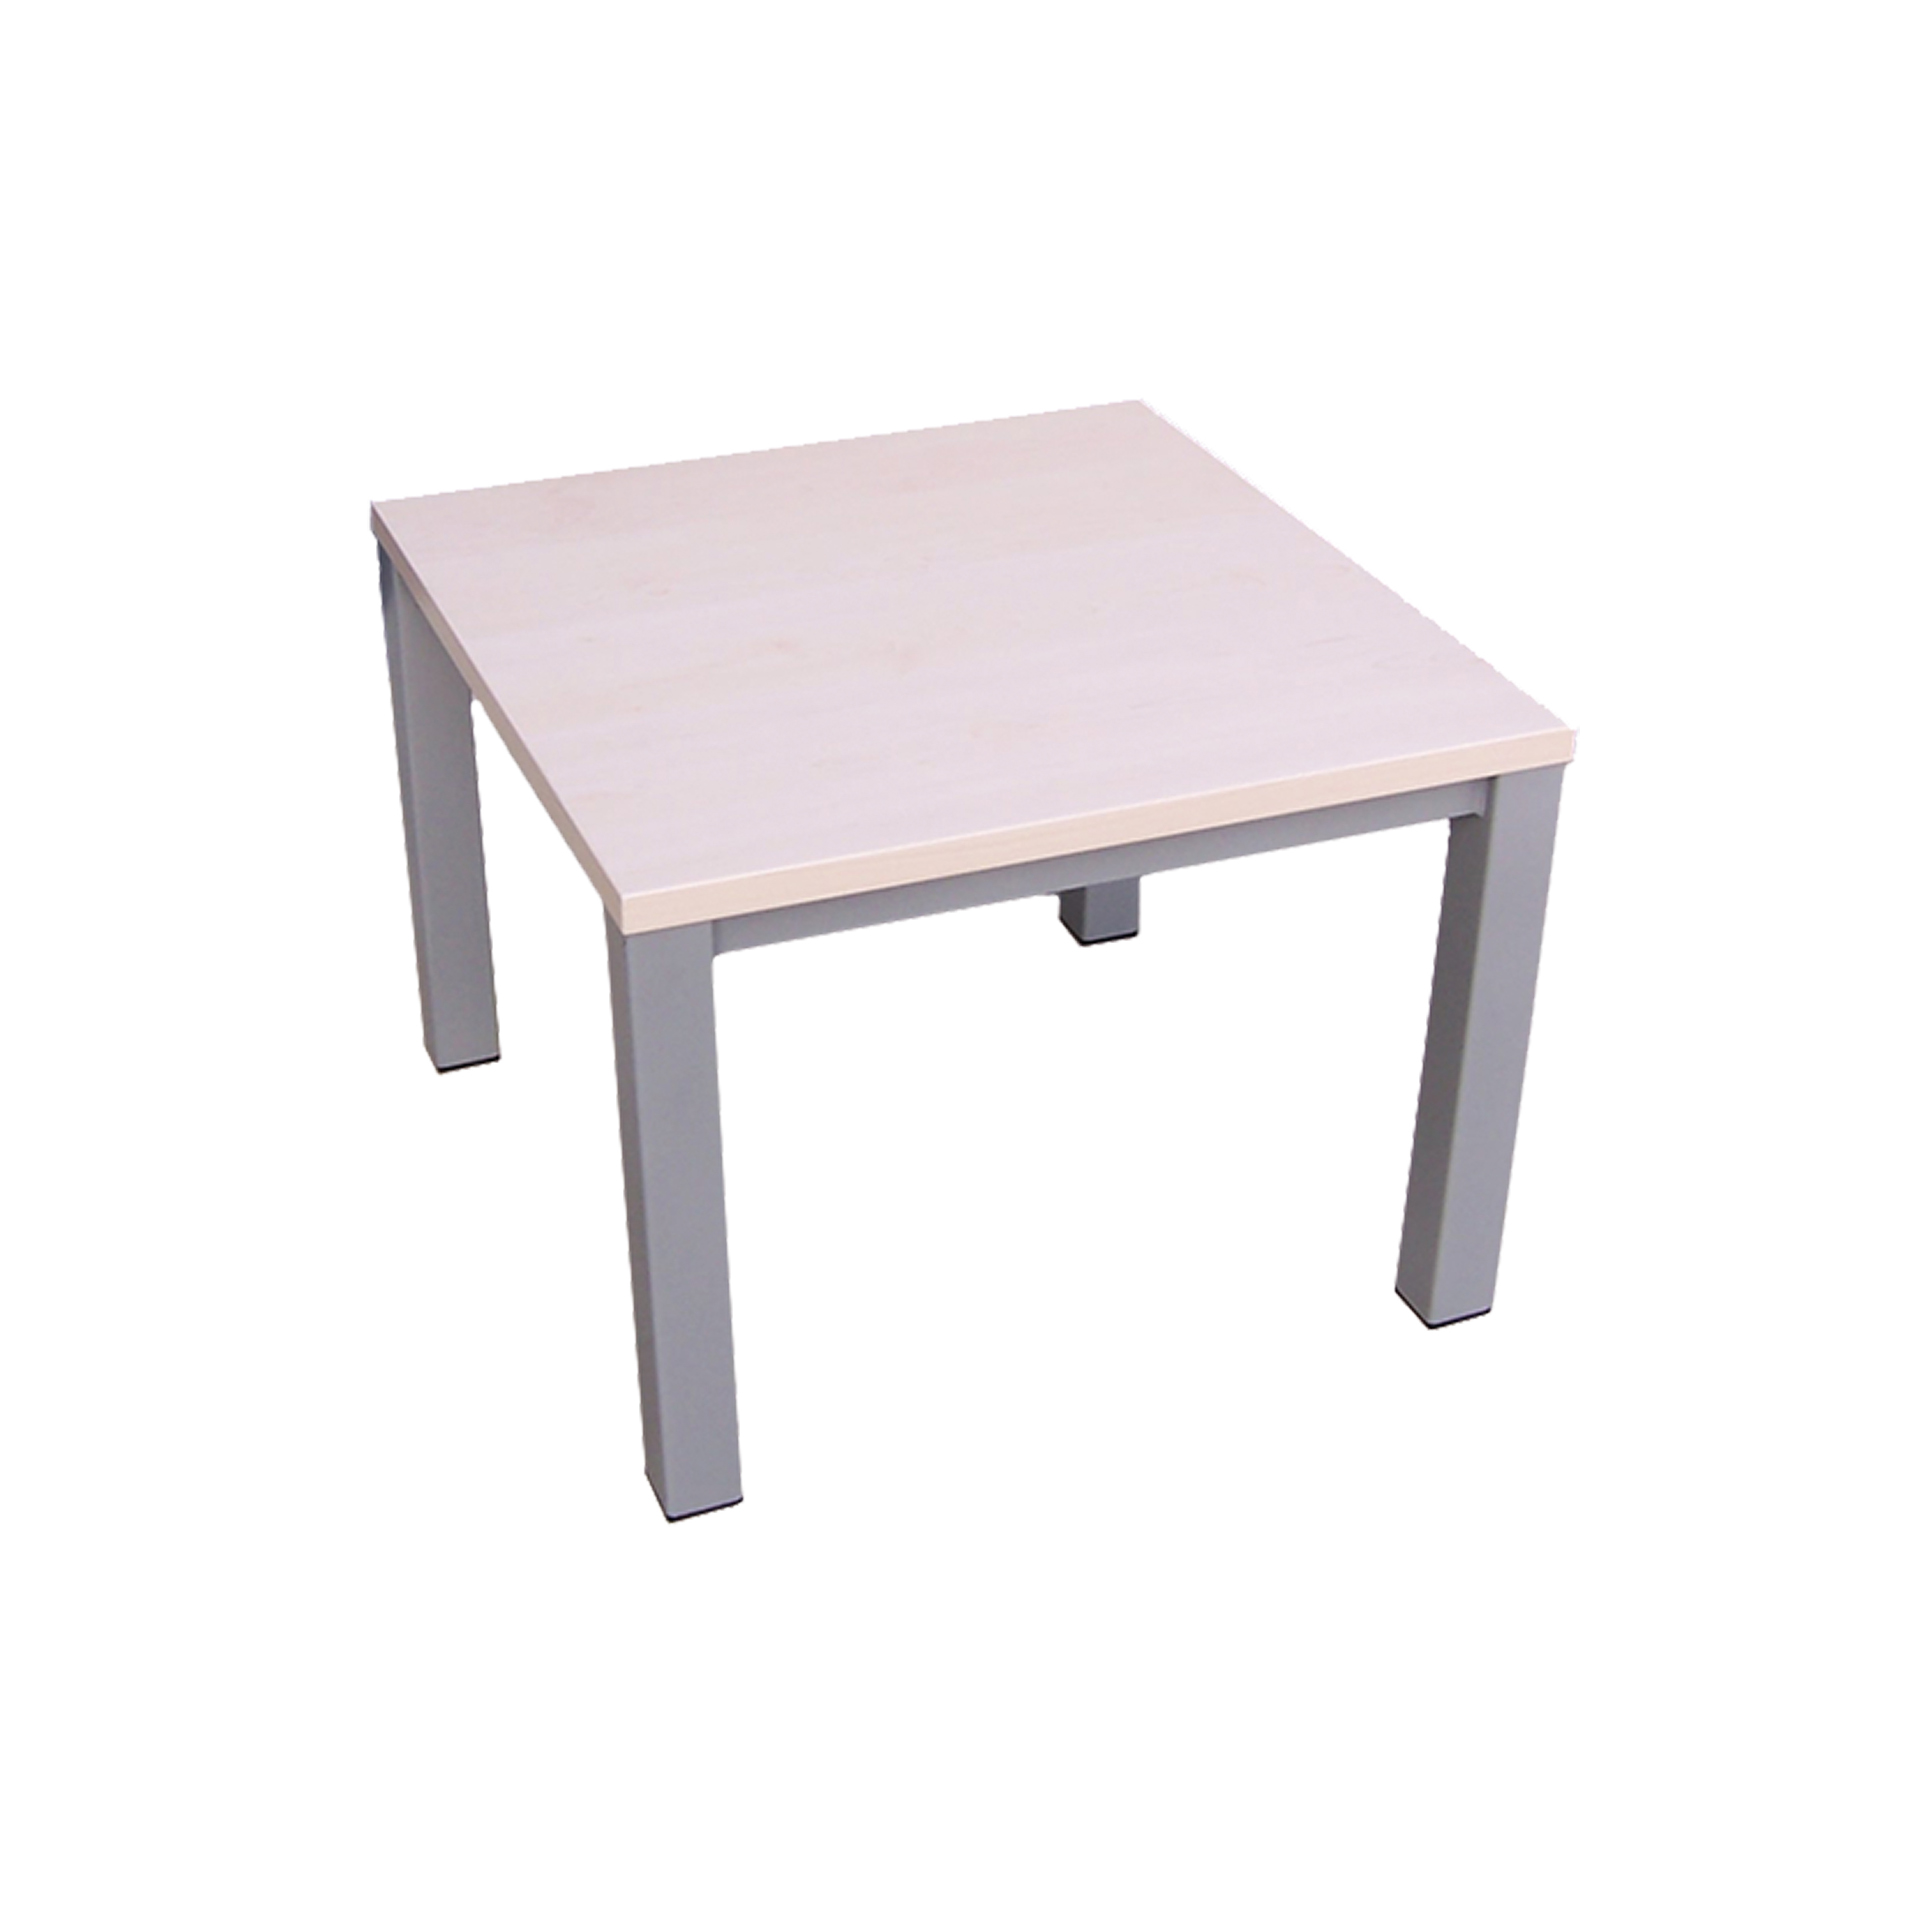 Educated furniture iquad coffee table for the school reception or staffroom